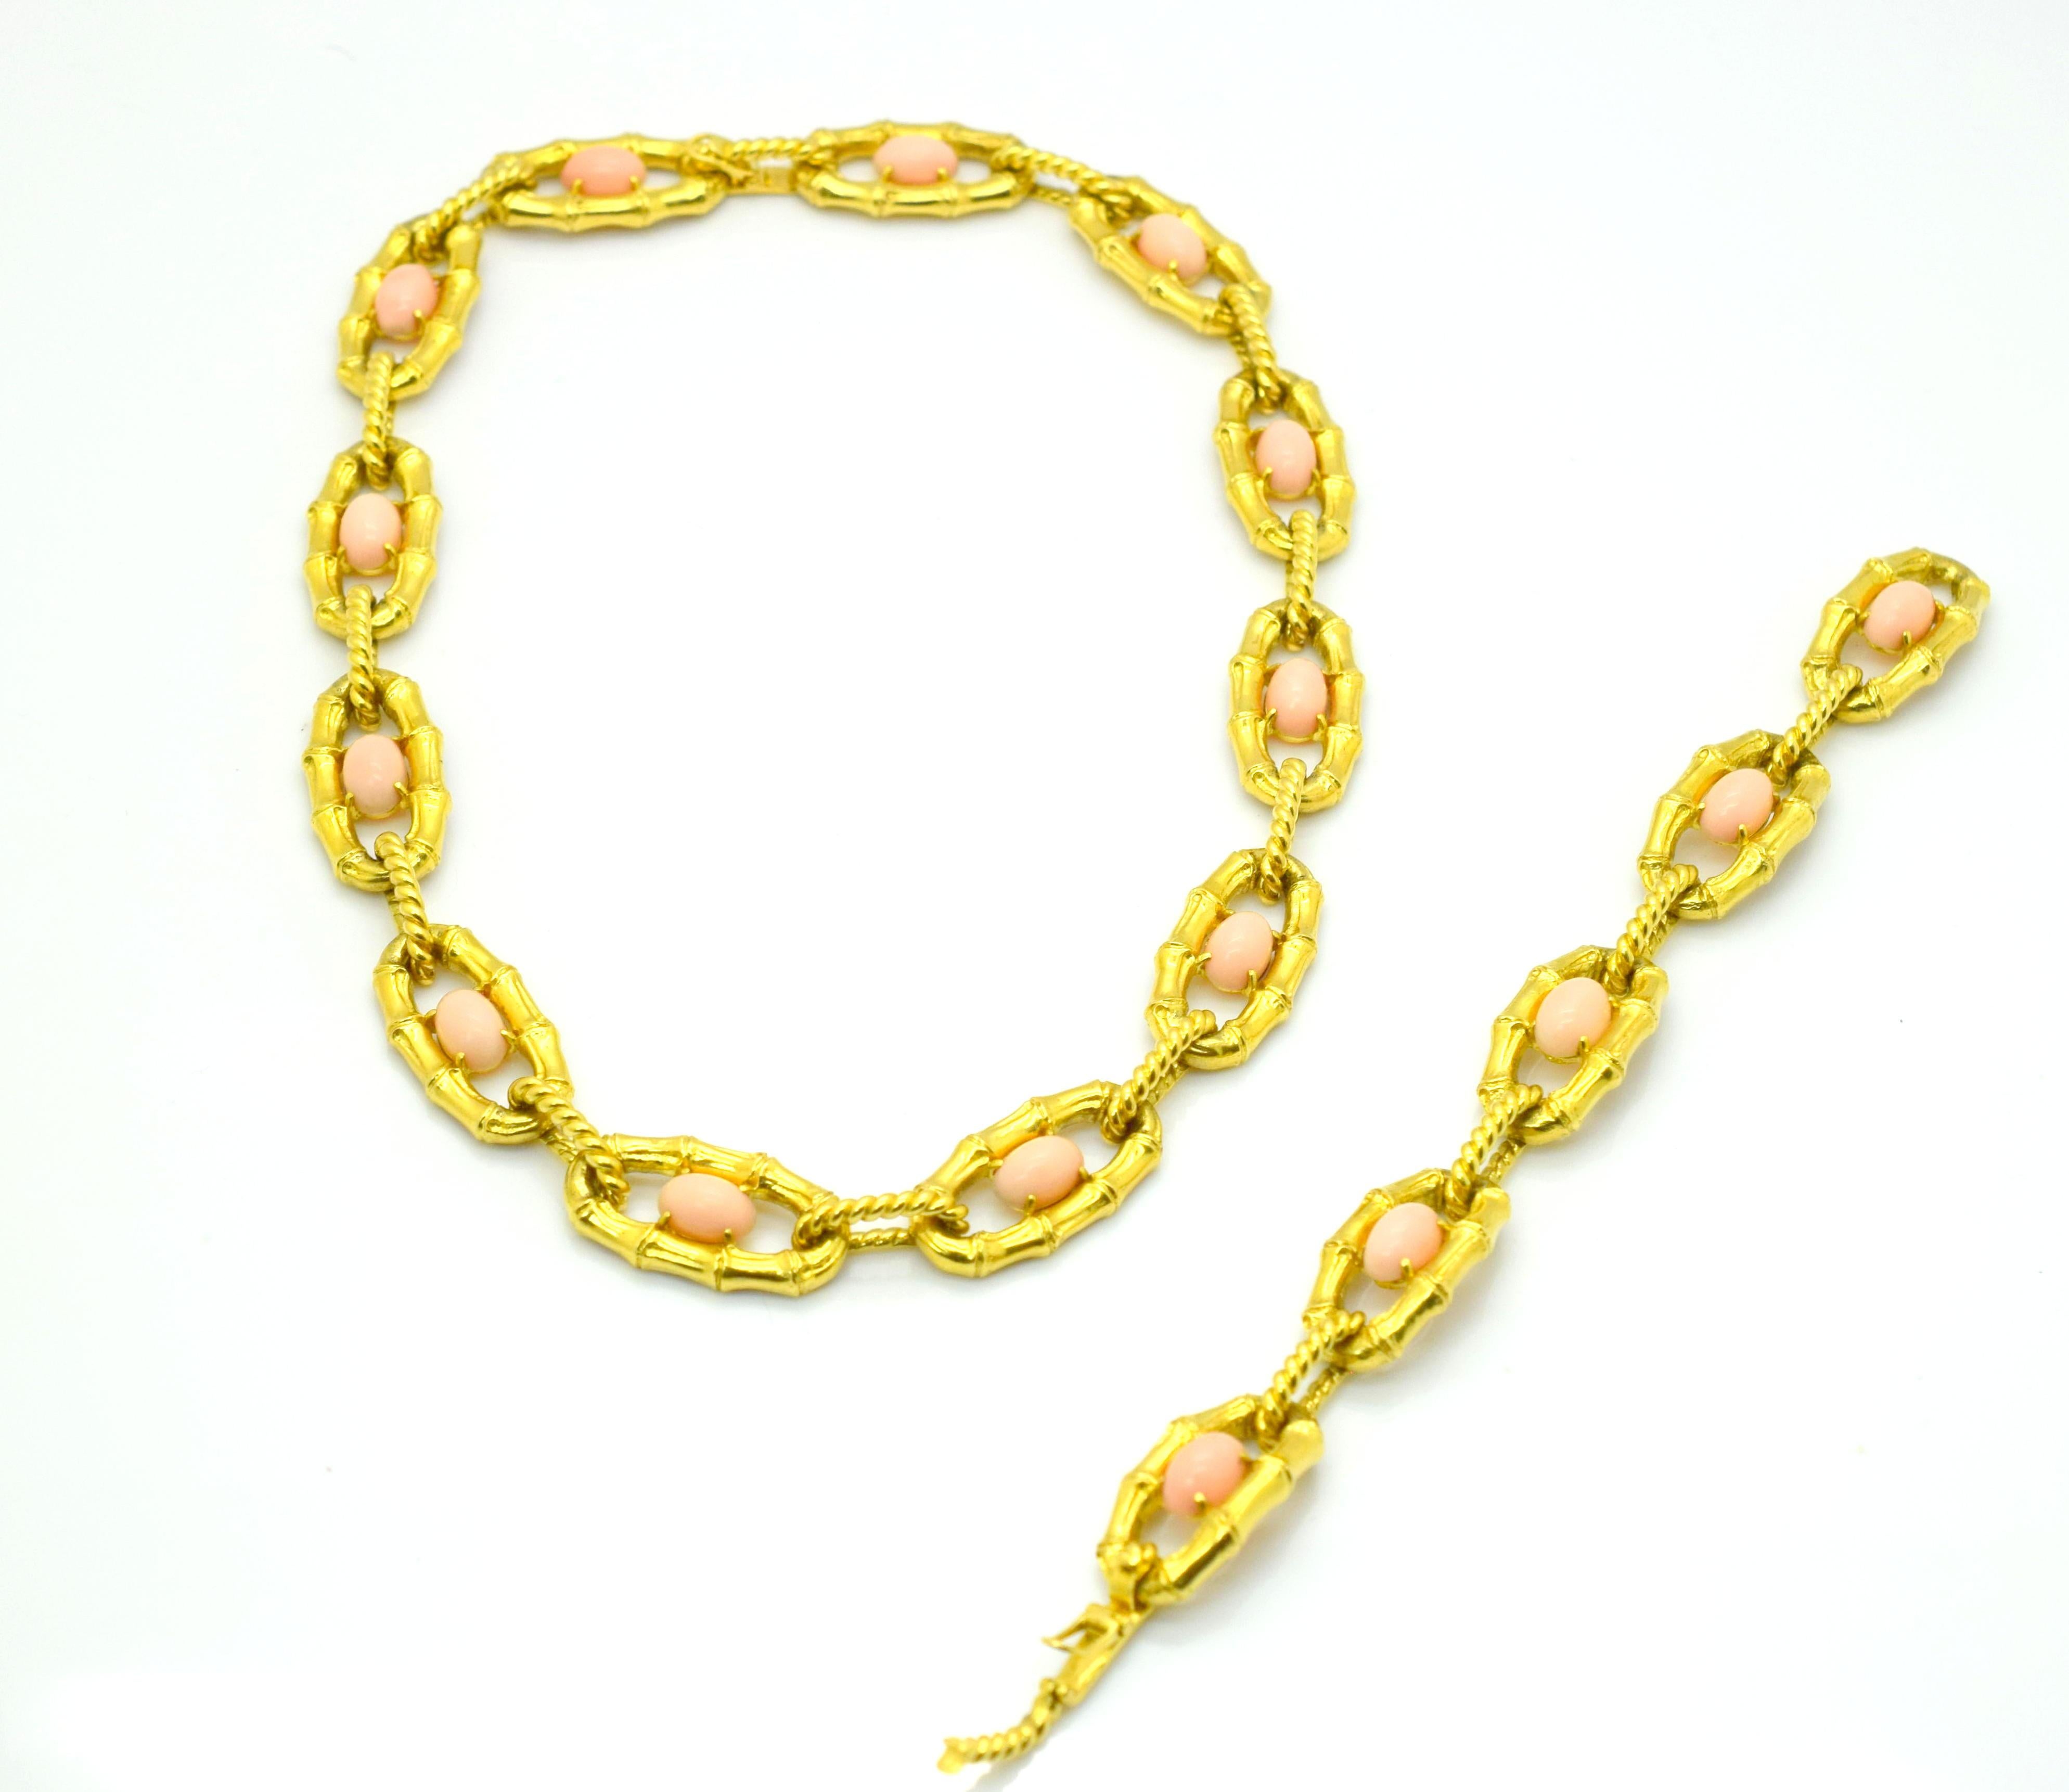 One of a kind necklace/bracelet crafted in 18k yellow gold. This amazing piece was crafted by masters of their time. The piece shows braided and bamboo motif links, each link is centered by a light pink Coral  